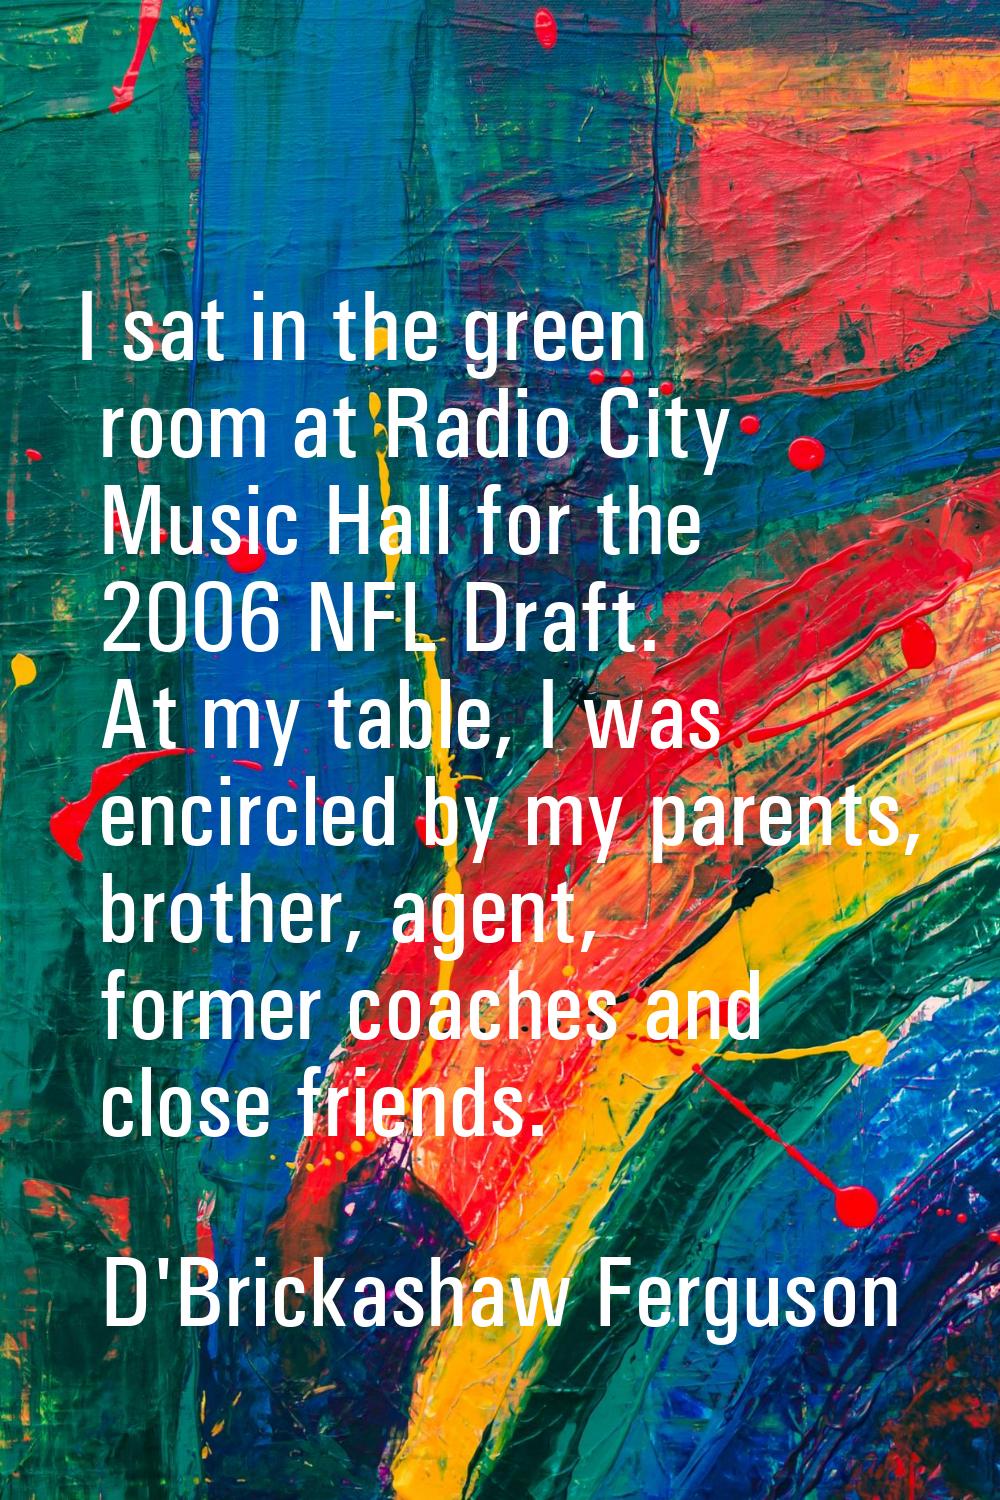 I sat in the green room at Radio City Music Hall for the 2006 NFL Draft. At my table, I was encircl